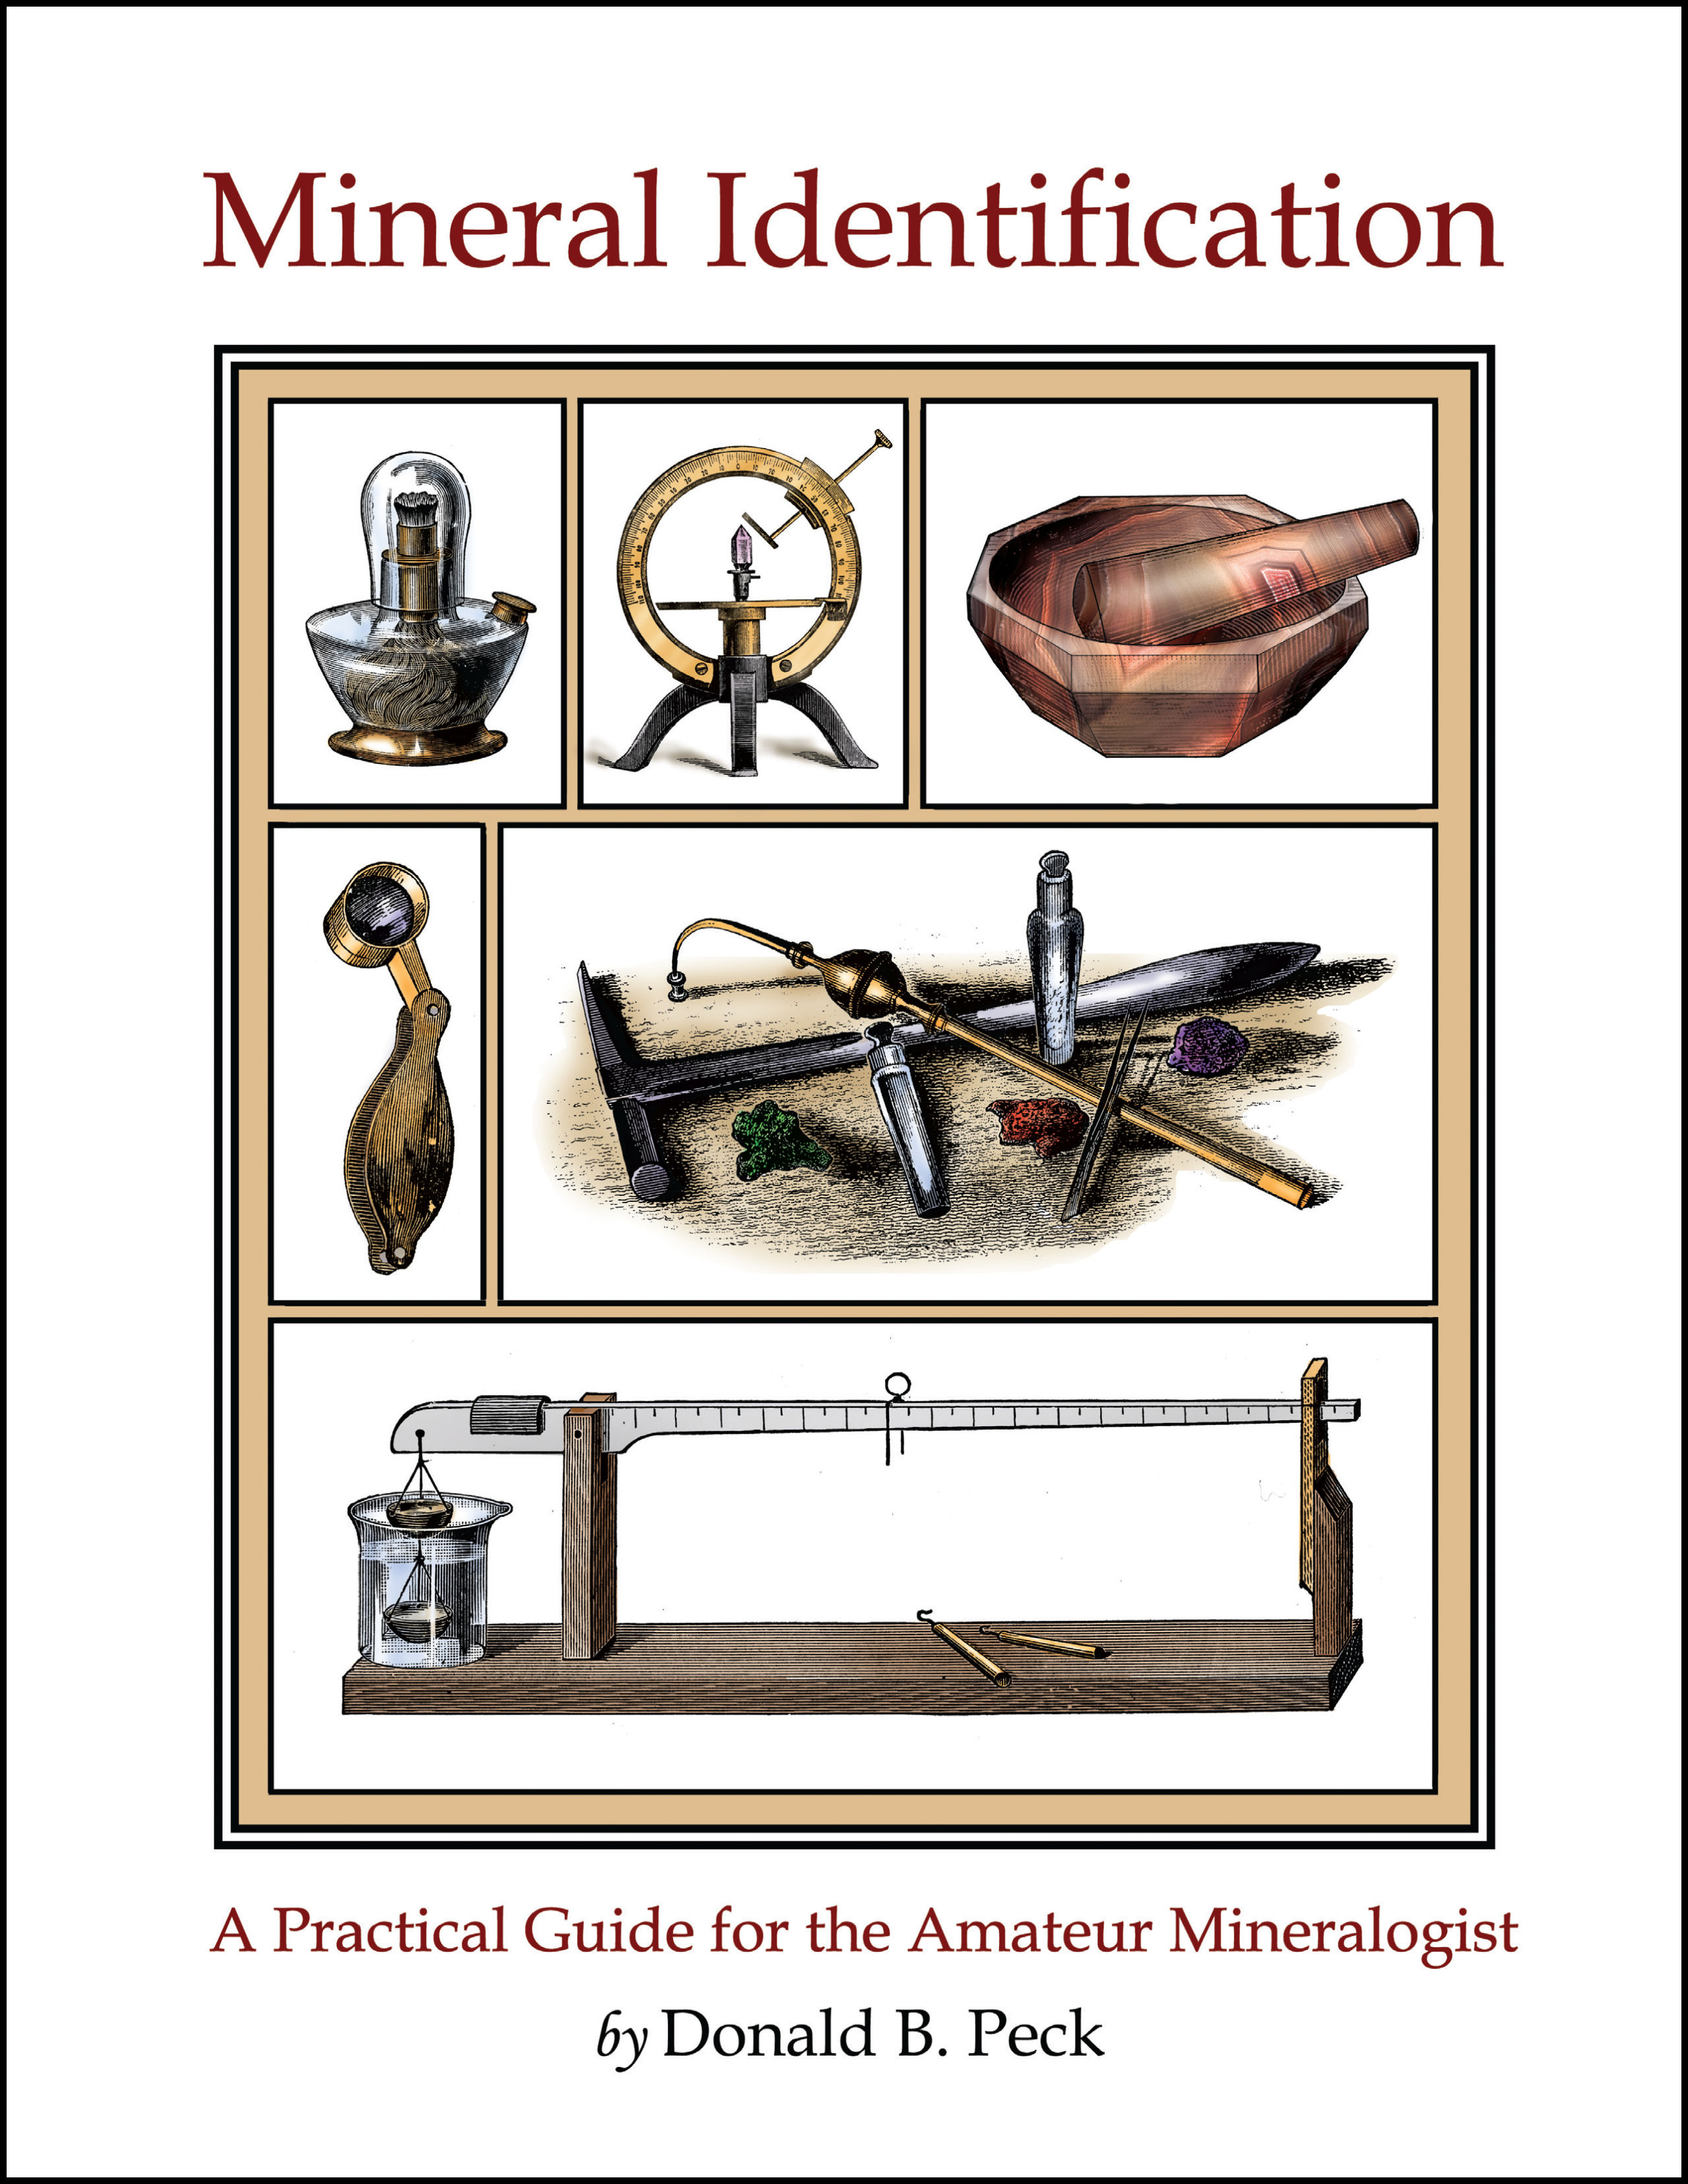 Mineral Identification: A Practical Guide for the Amateur Mineralogist